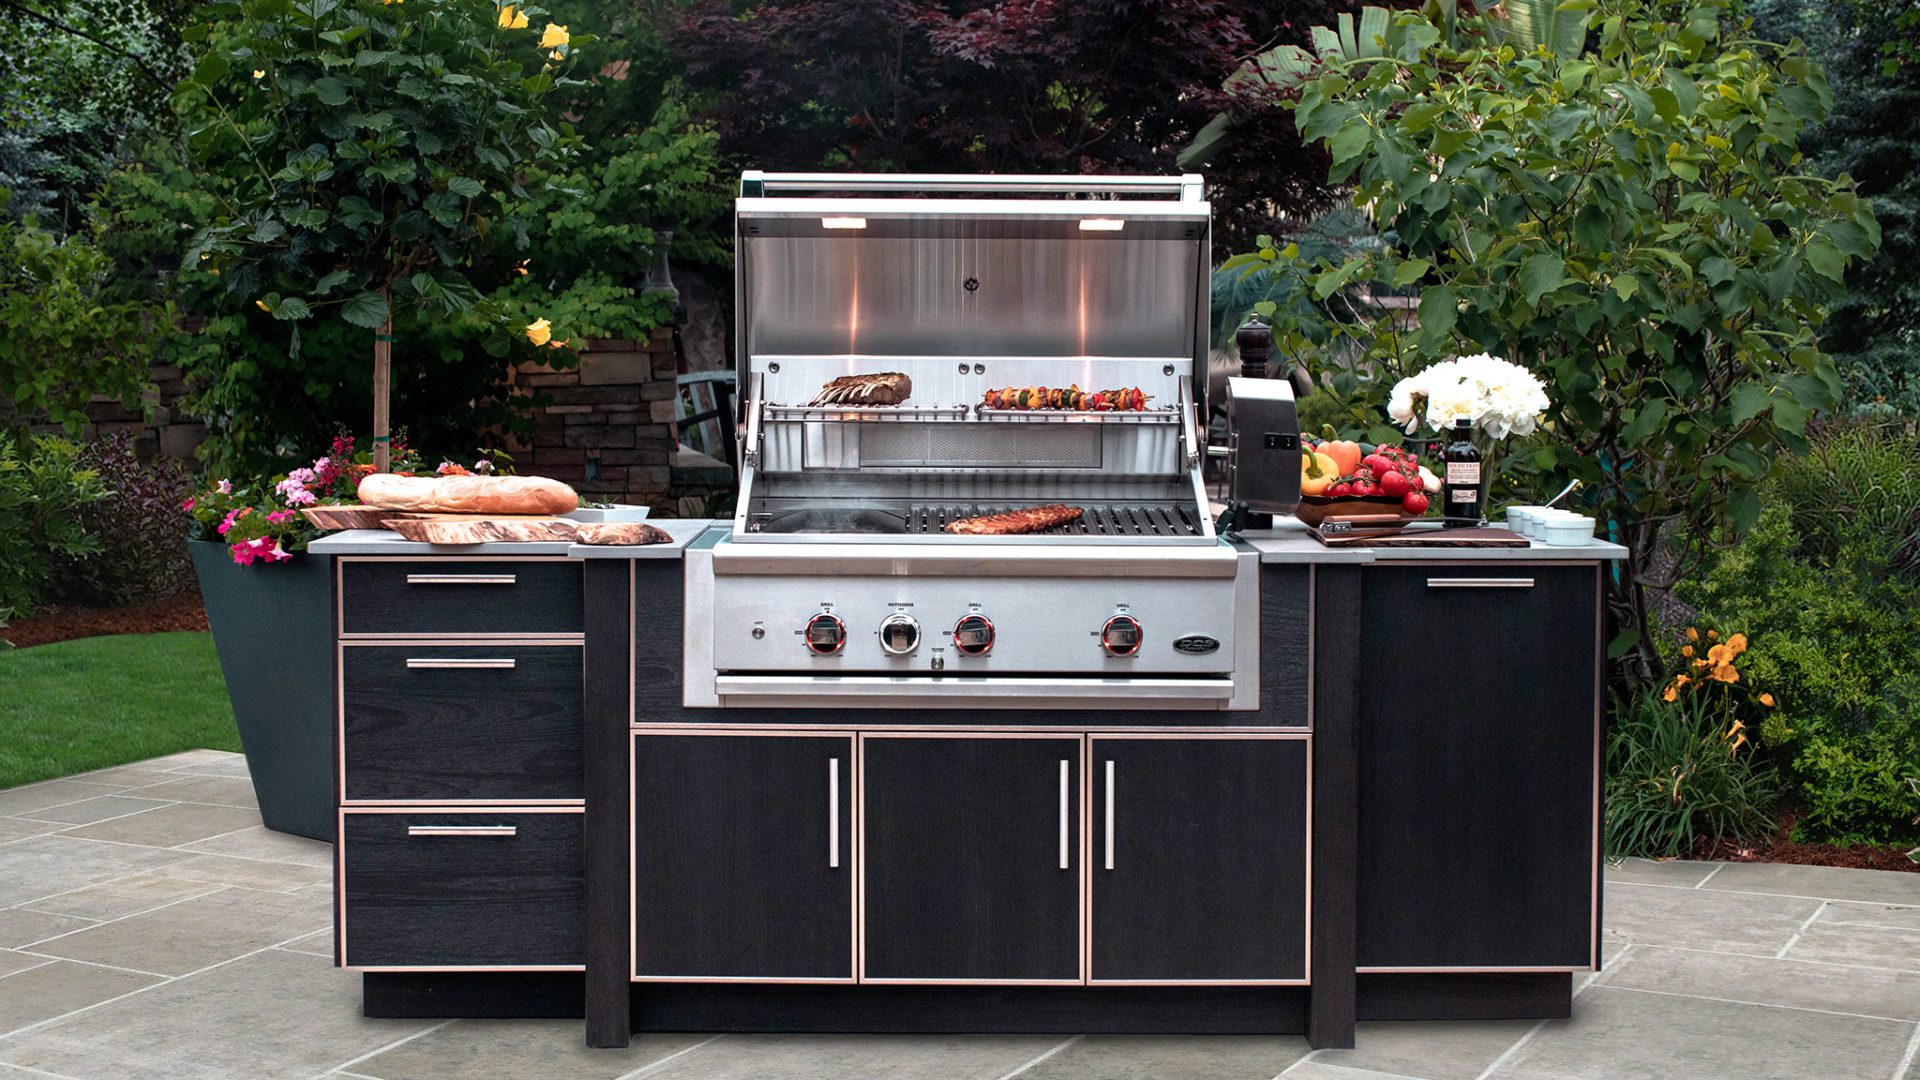 Your House is Missing an Outdoor Kitchen